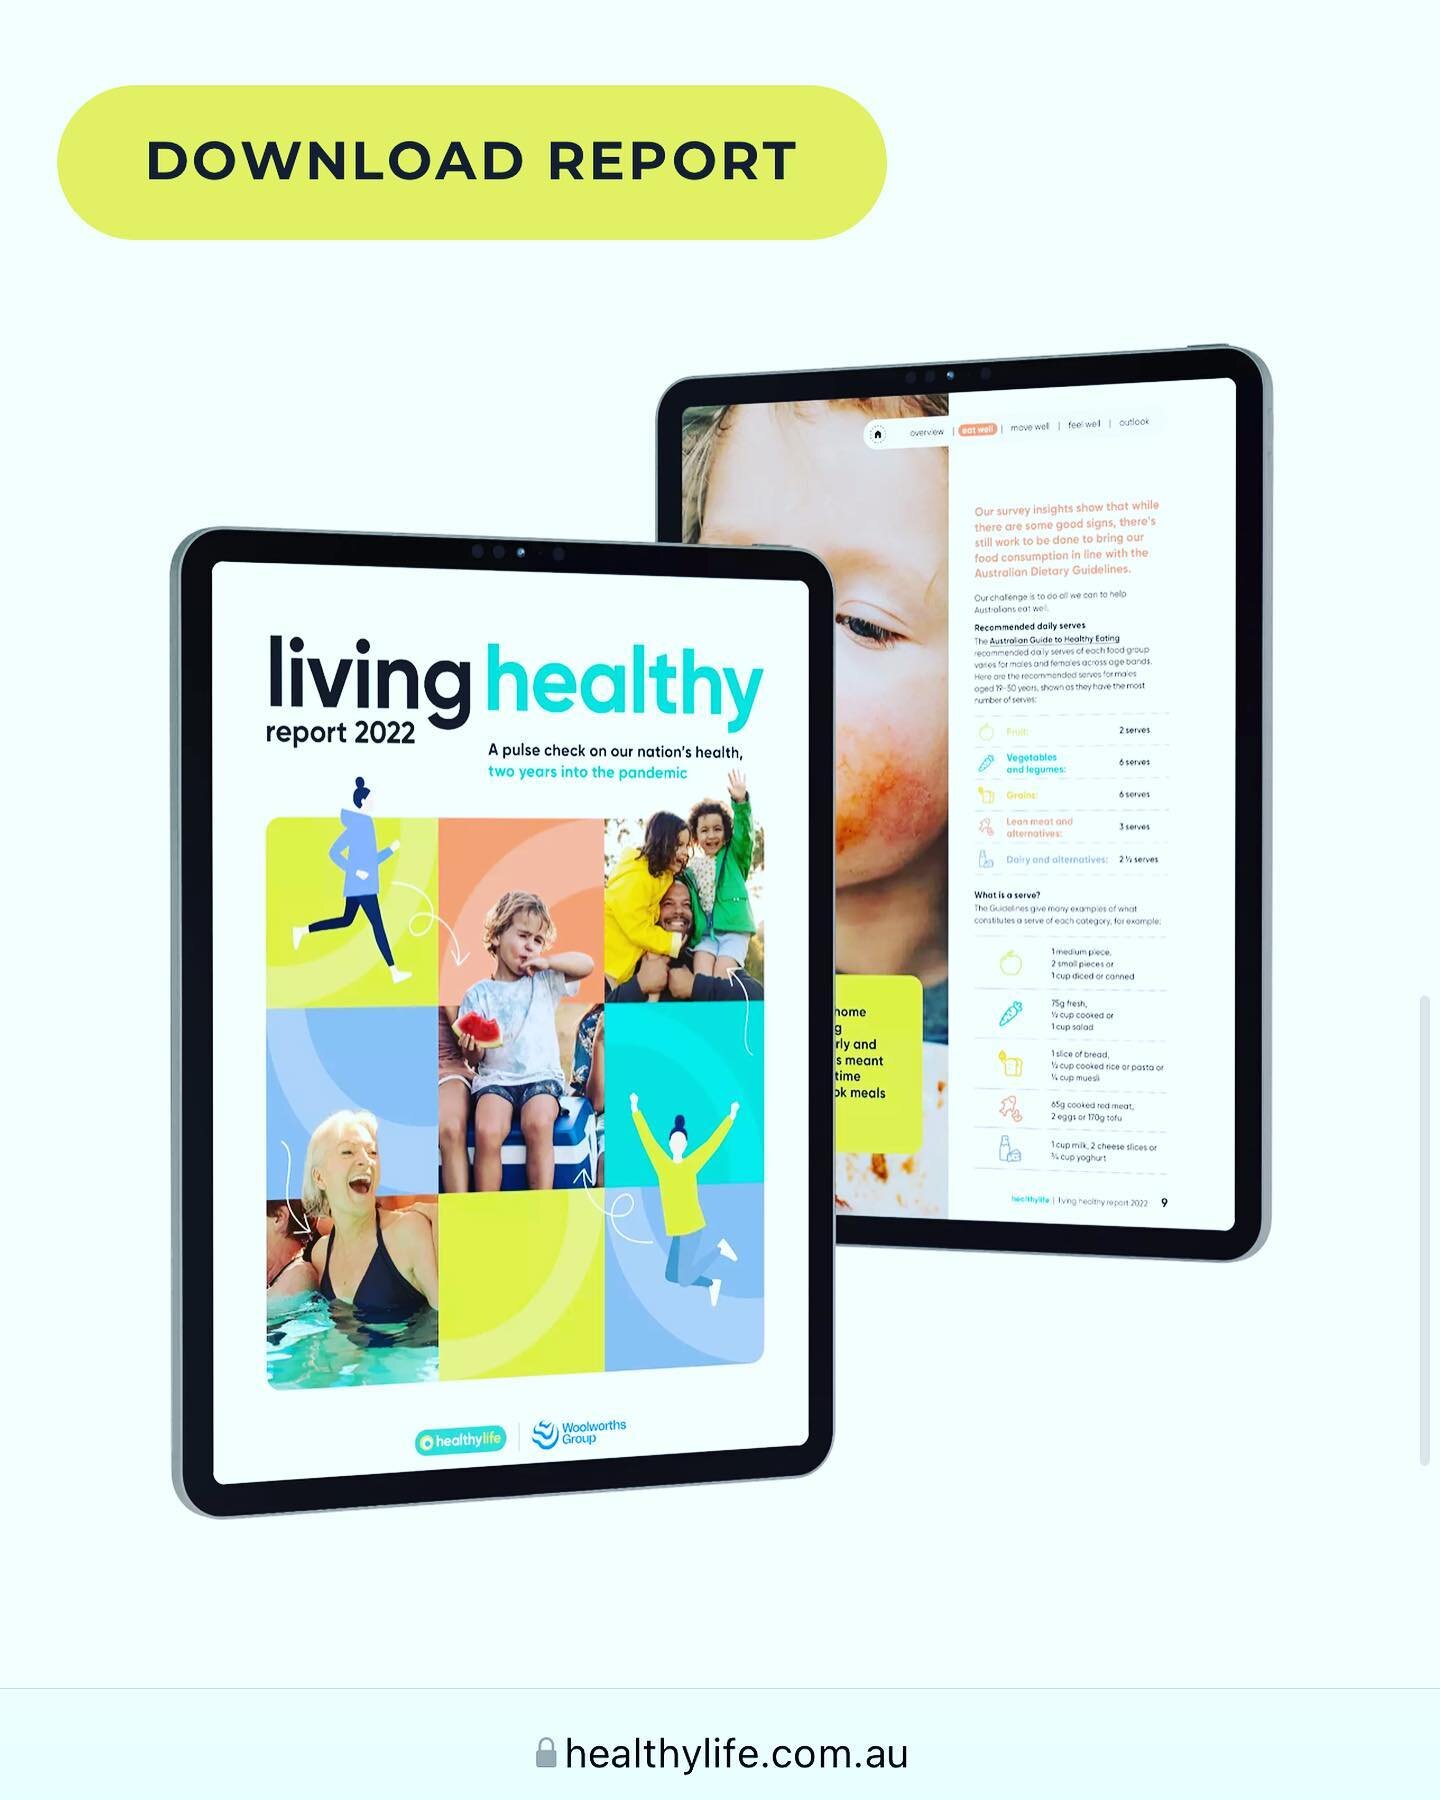 Want to know what Aussies are eating?
Check out this amazing reports compiled using shopping basket data from @woolworths_au by @healthylifeau 

Some great tips to eat well, move well and feel well.

https://www.healthylife.com.au/reports/living-heal